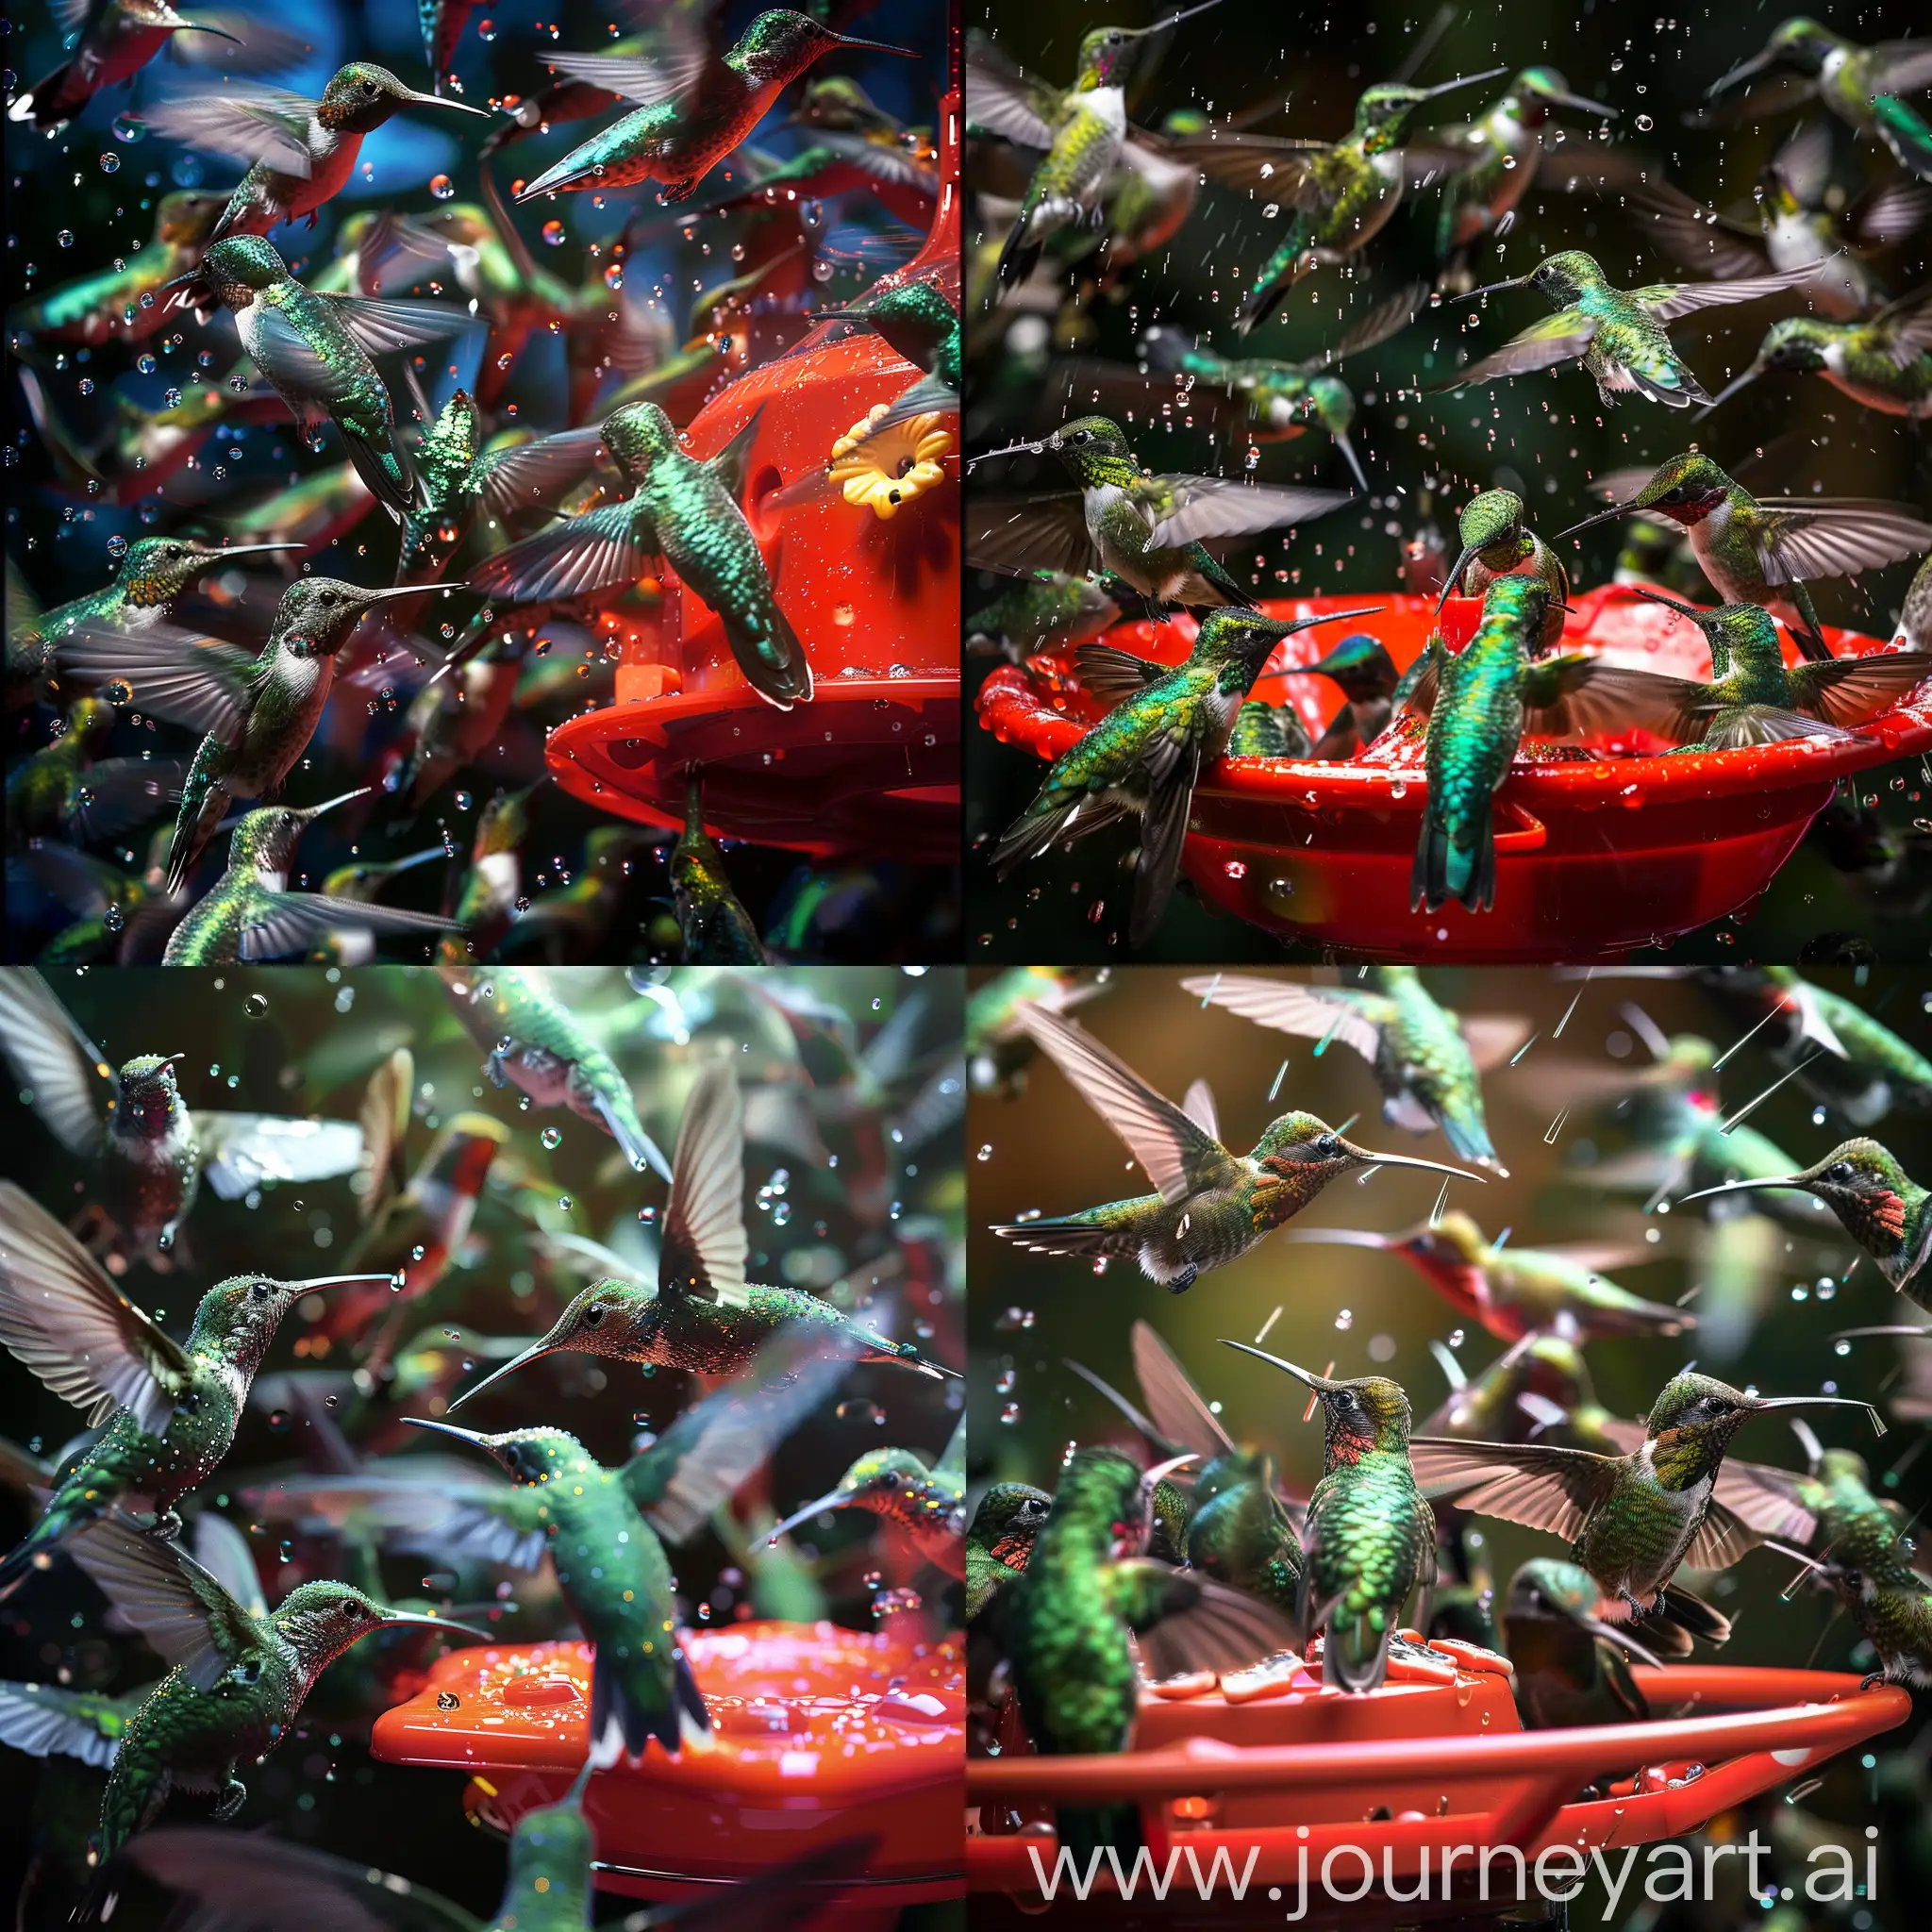 A swarm of metallic-green iridescent hummingbirds clustered around a bright red feeder, their rapidly beating wings frozen in motion, individual water droplets and feather barbs discernible in the 8K, HDR image